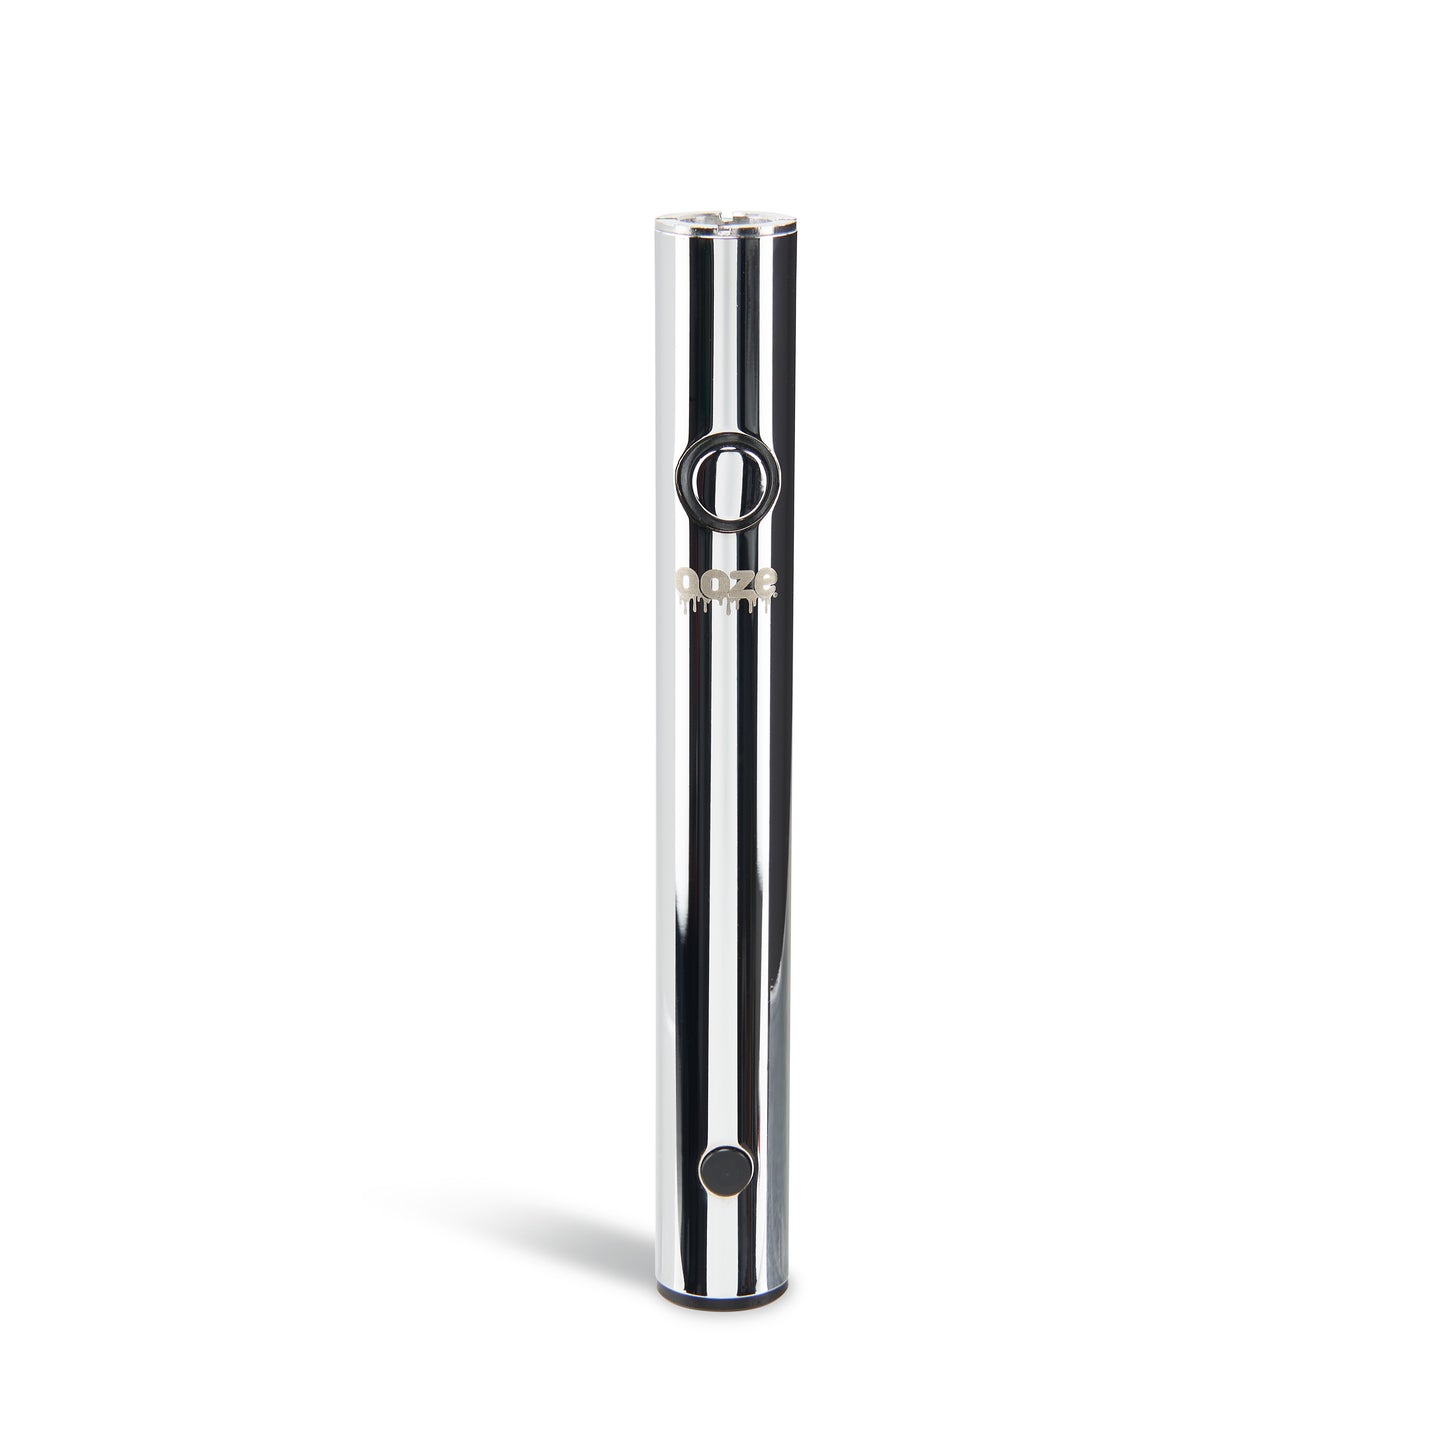 The chrome Ooze Wink flashlight pen is standing straight upright